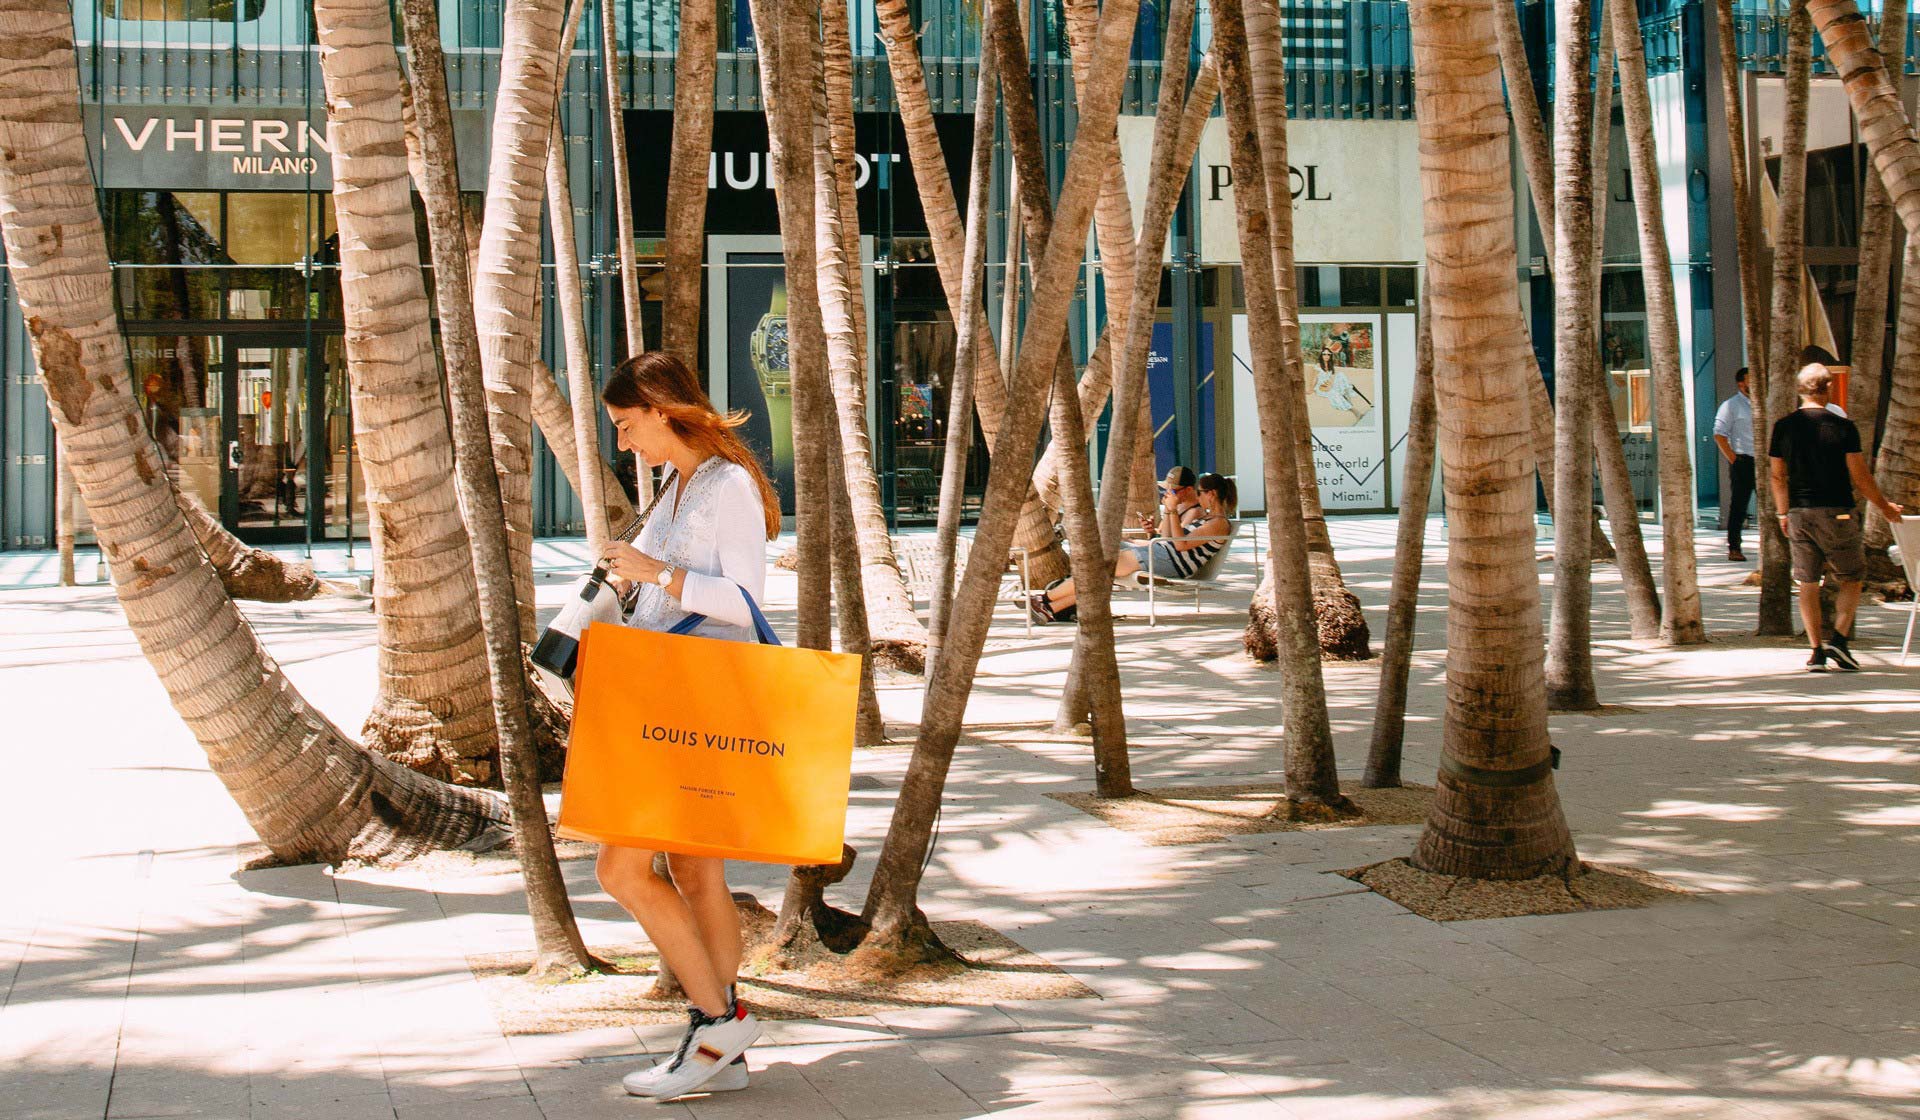 Miami Design District - All You Need to Know BEFORE You Go (with